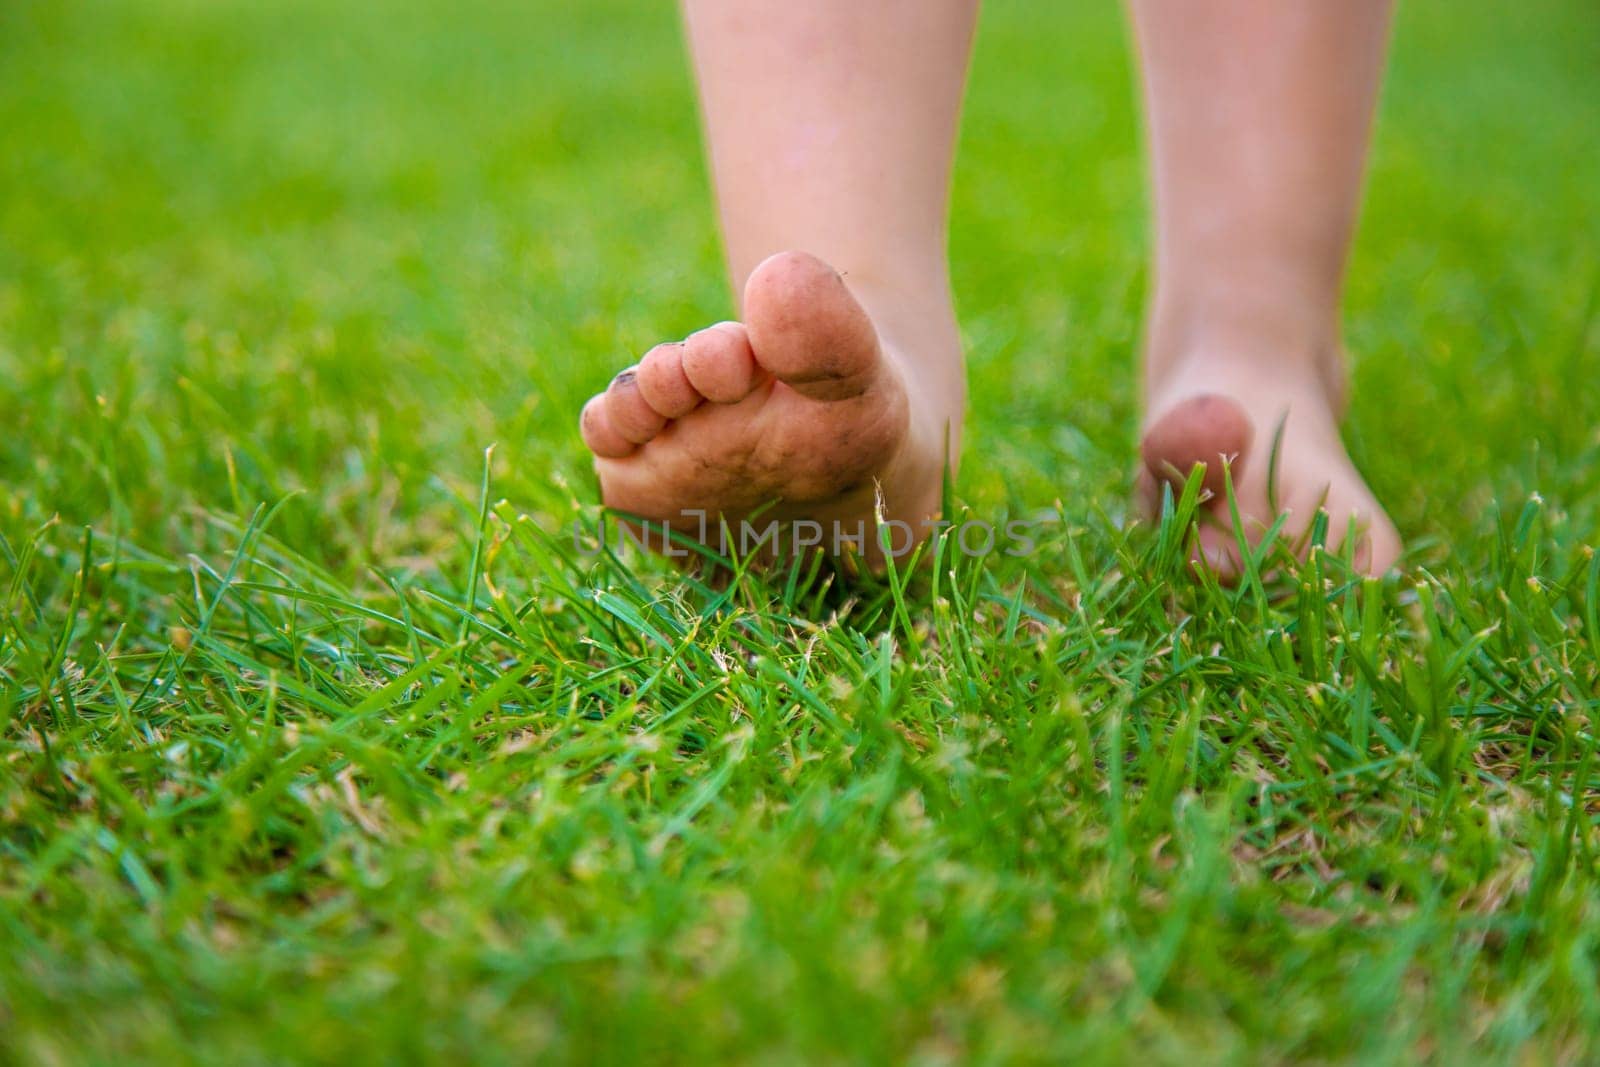 Child feet on the grass. Selective focus. Kid.